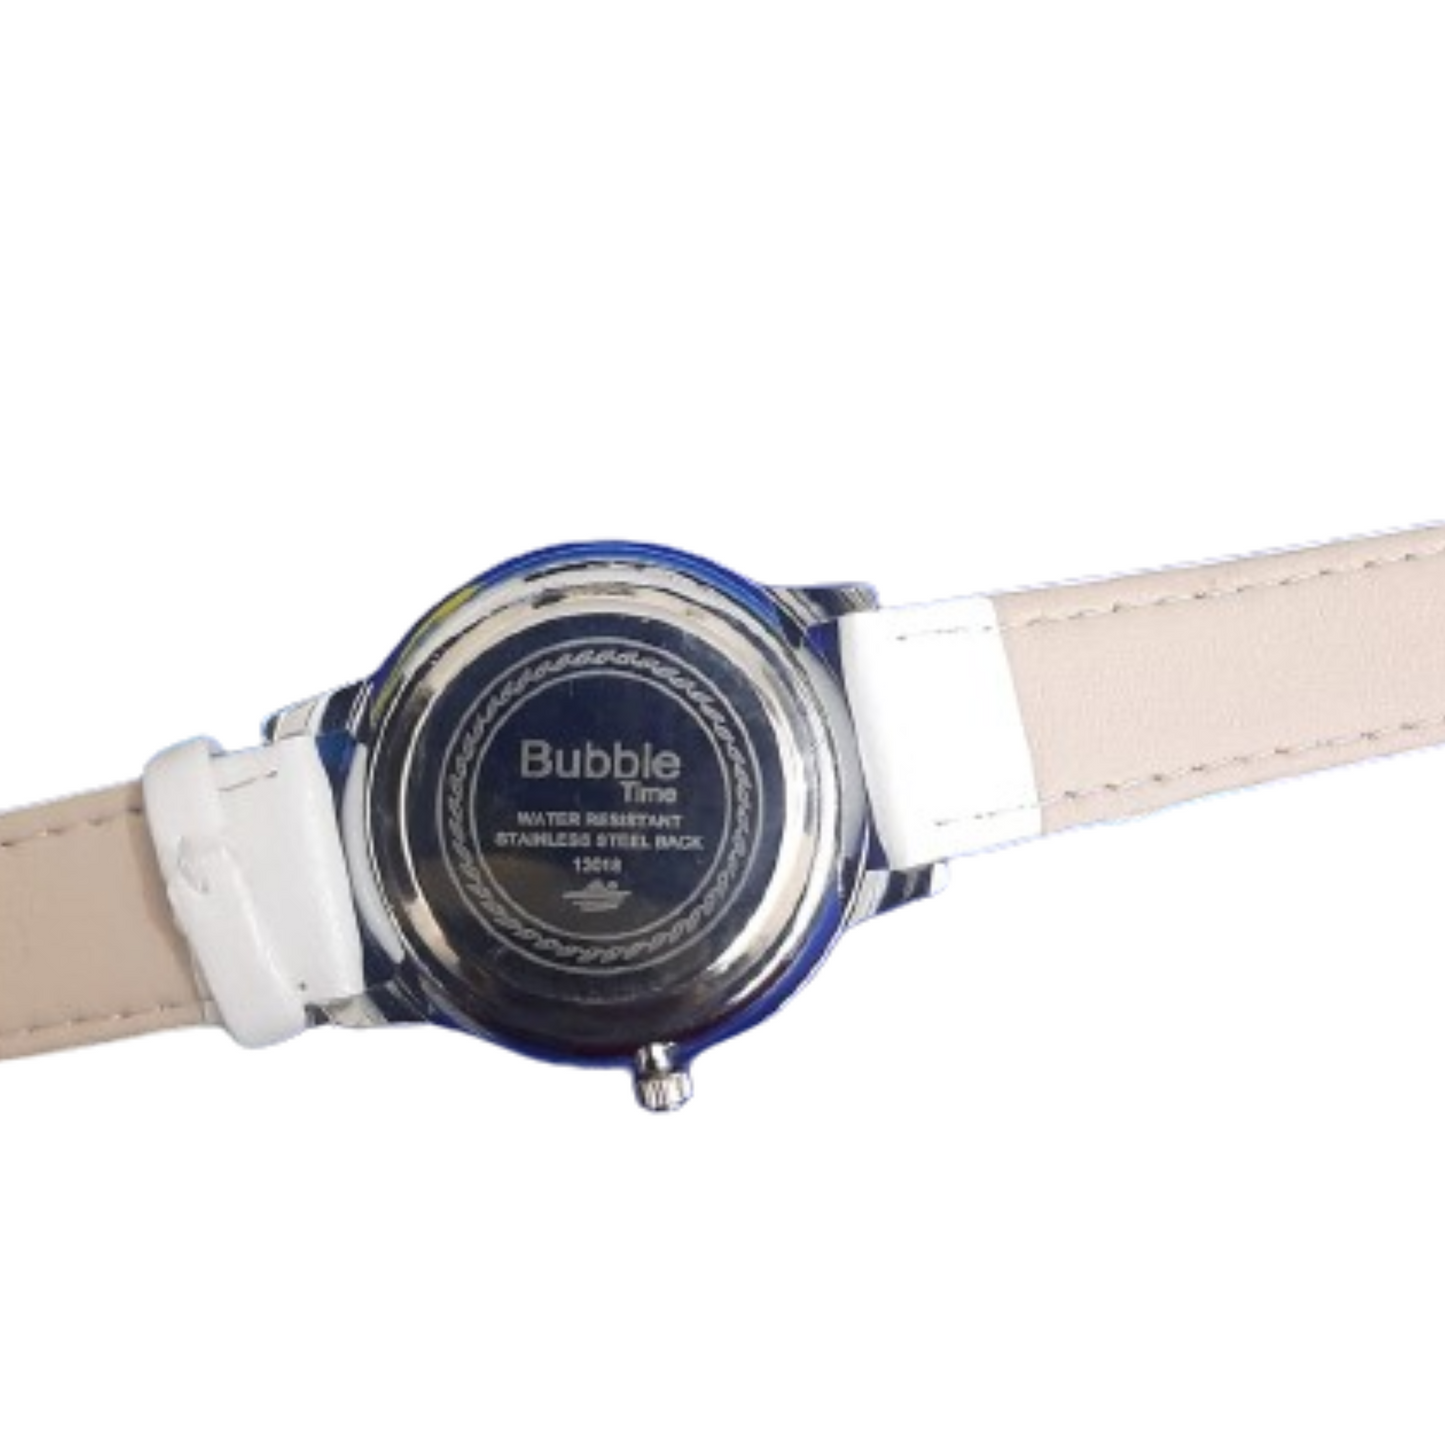 Bubble Time Textured Wrist Watch